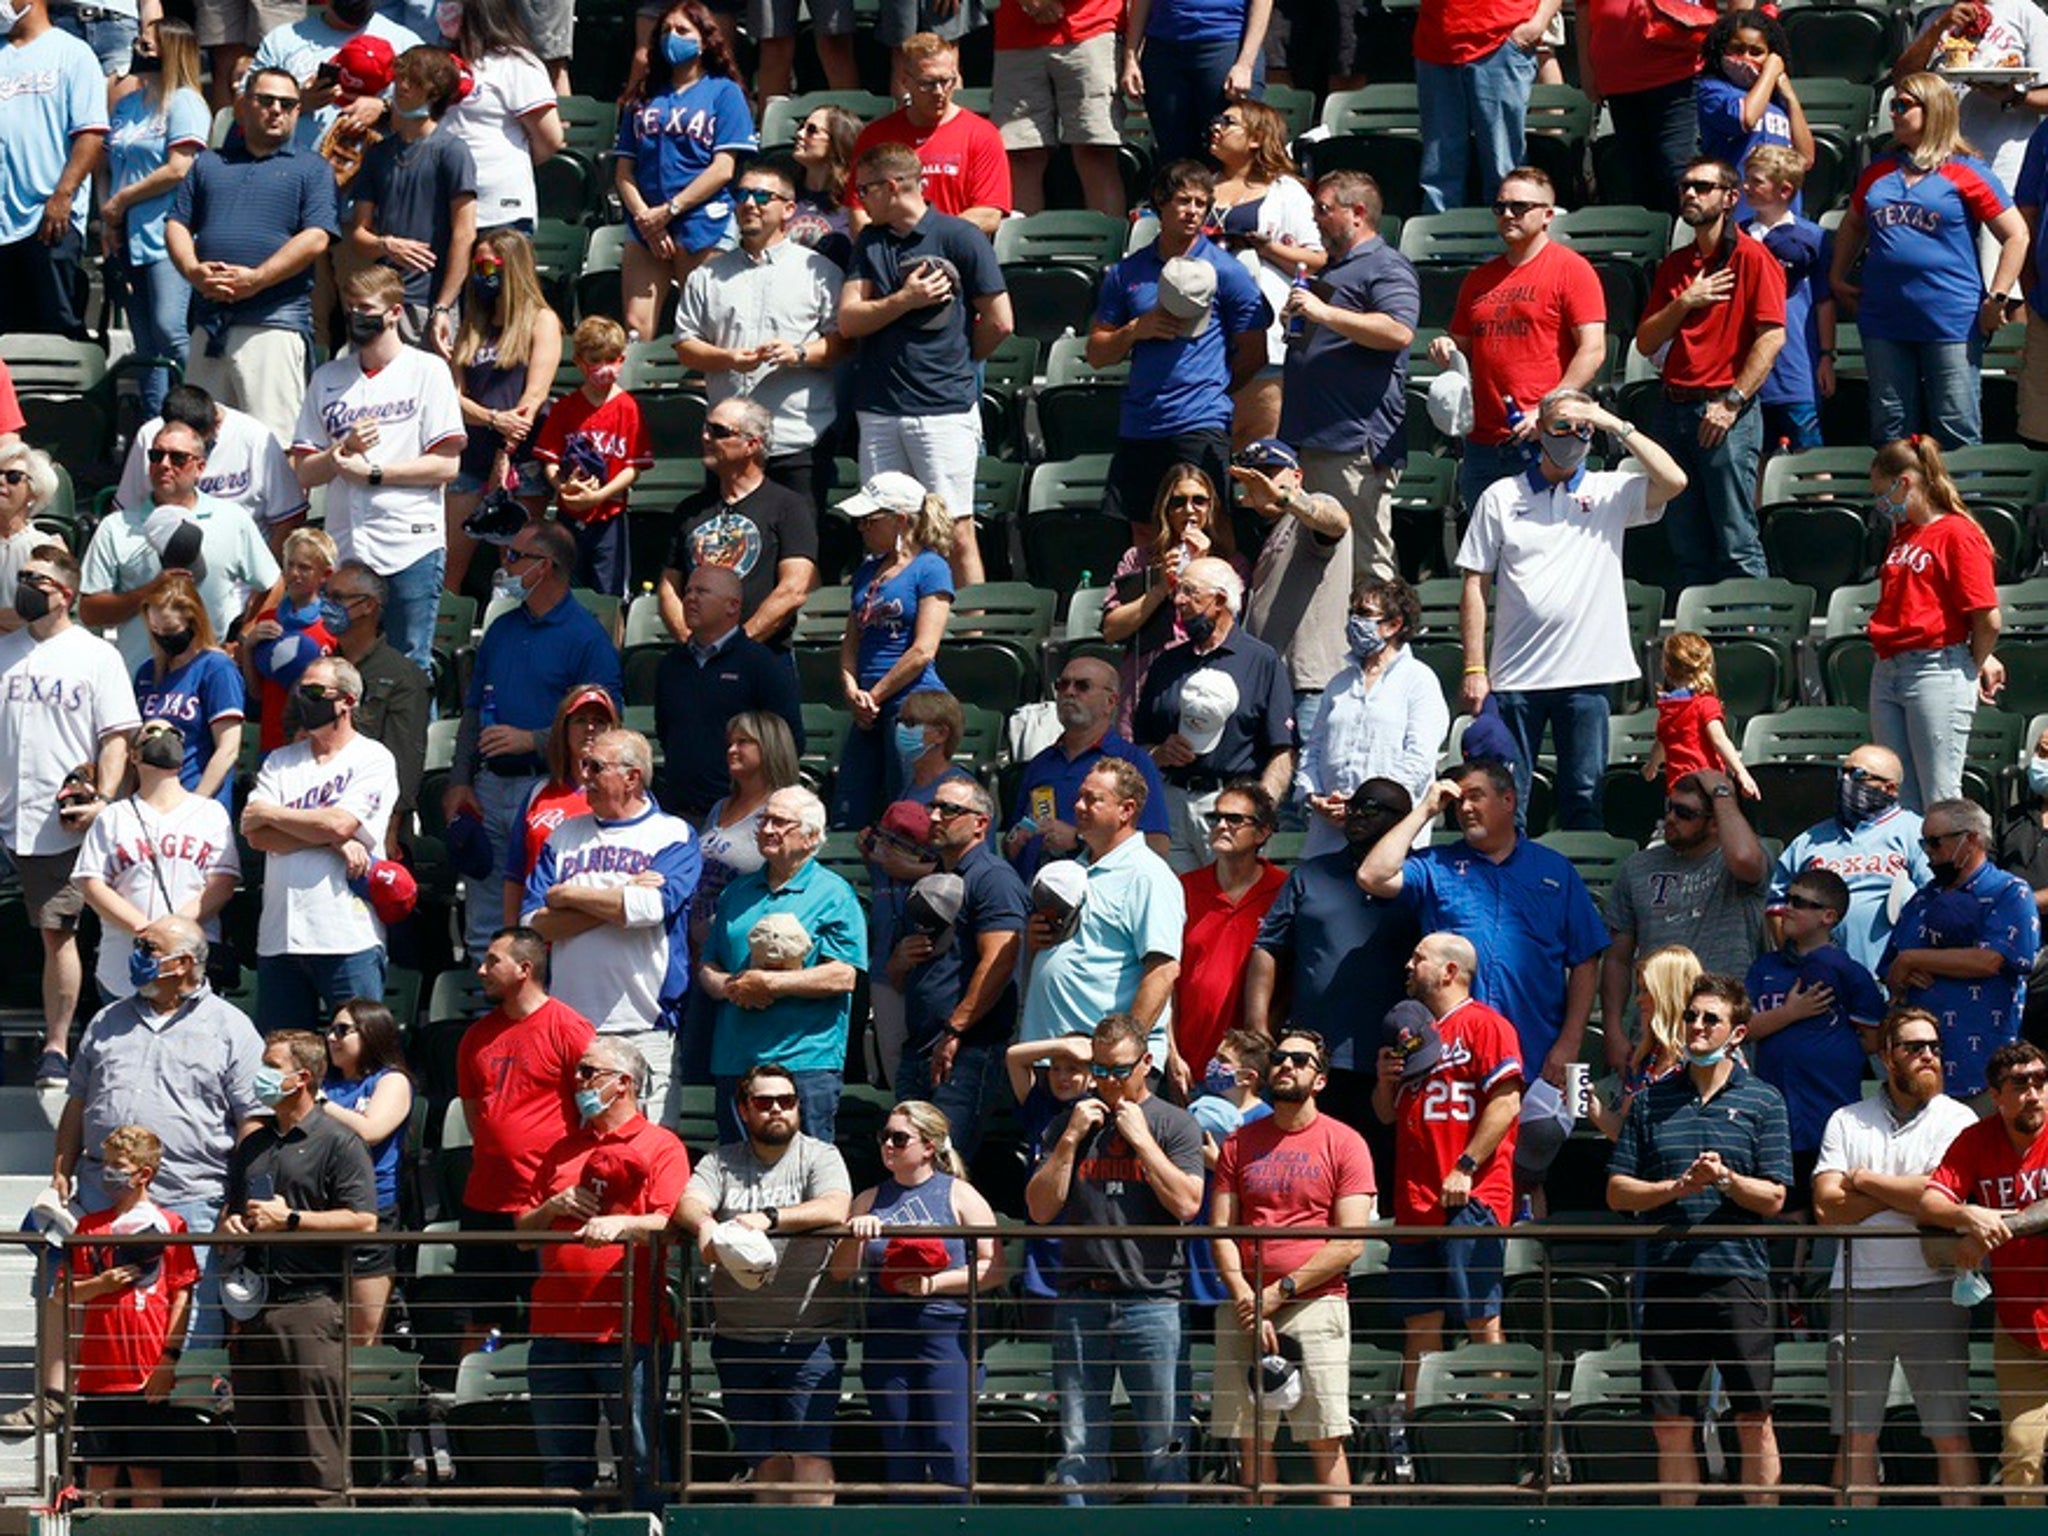 MLB Fans Pack Texas Rangers' Stadium, What Social Distancing?!